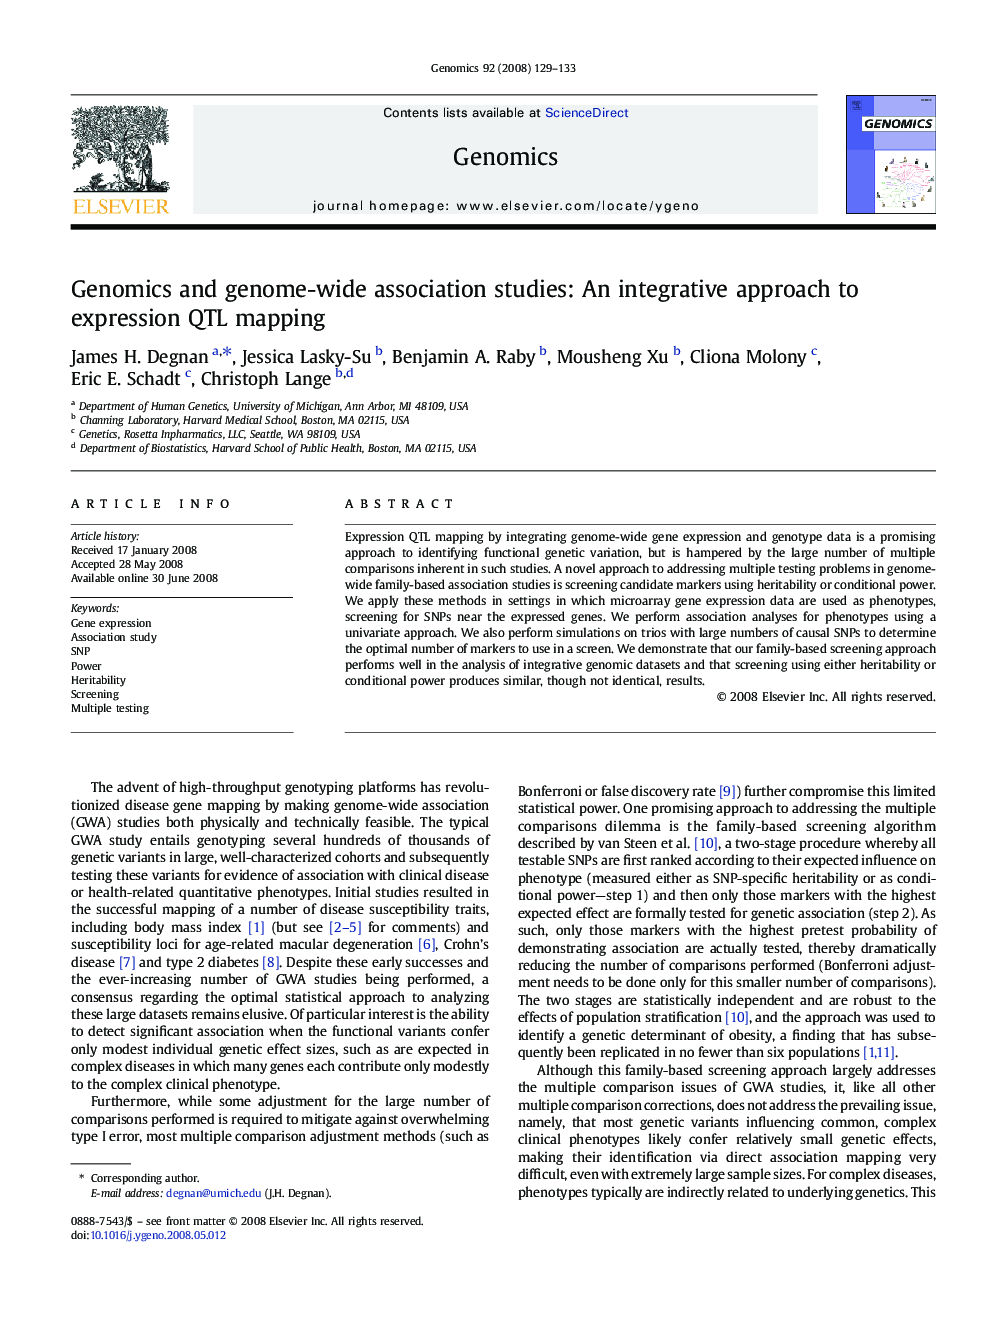 Genomics and genome-wide association studies: An integrative approach to expression QTL mapping